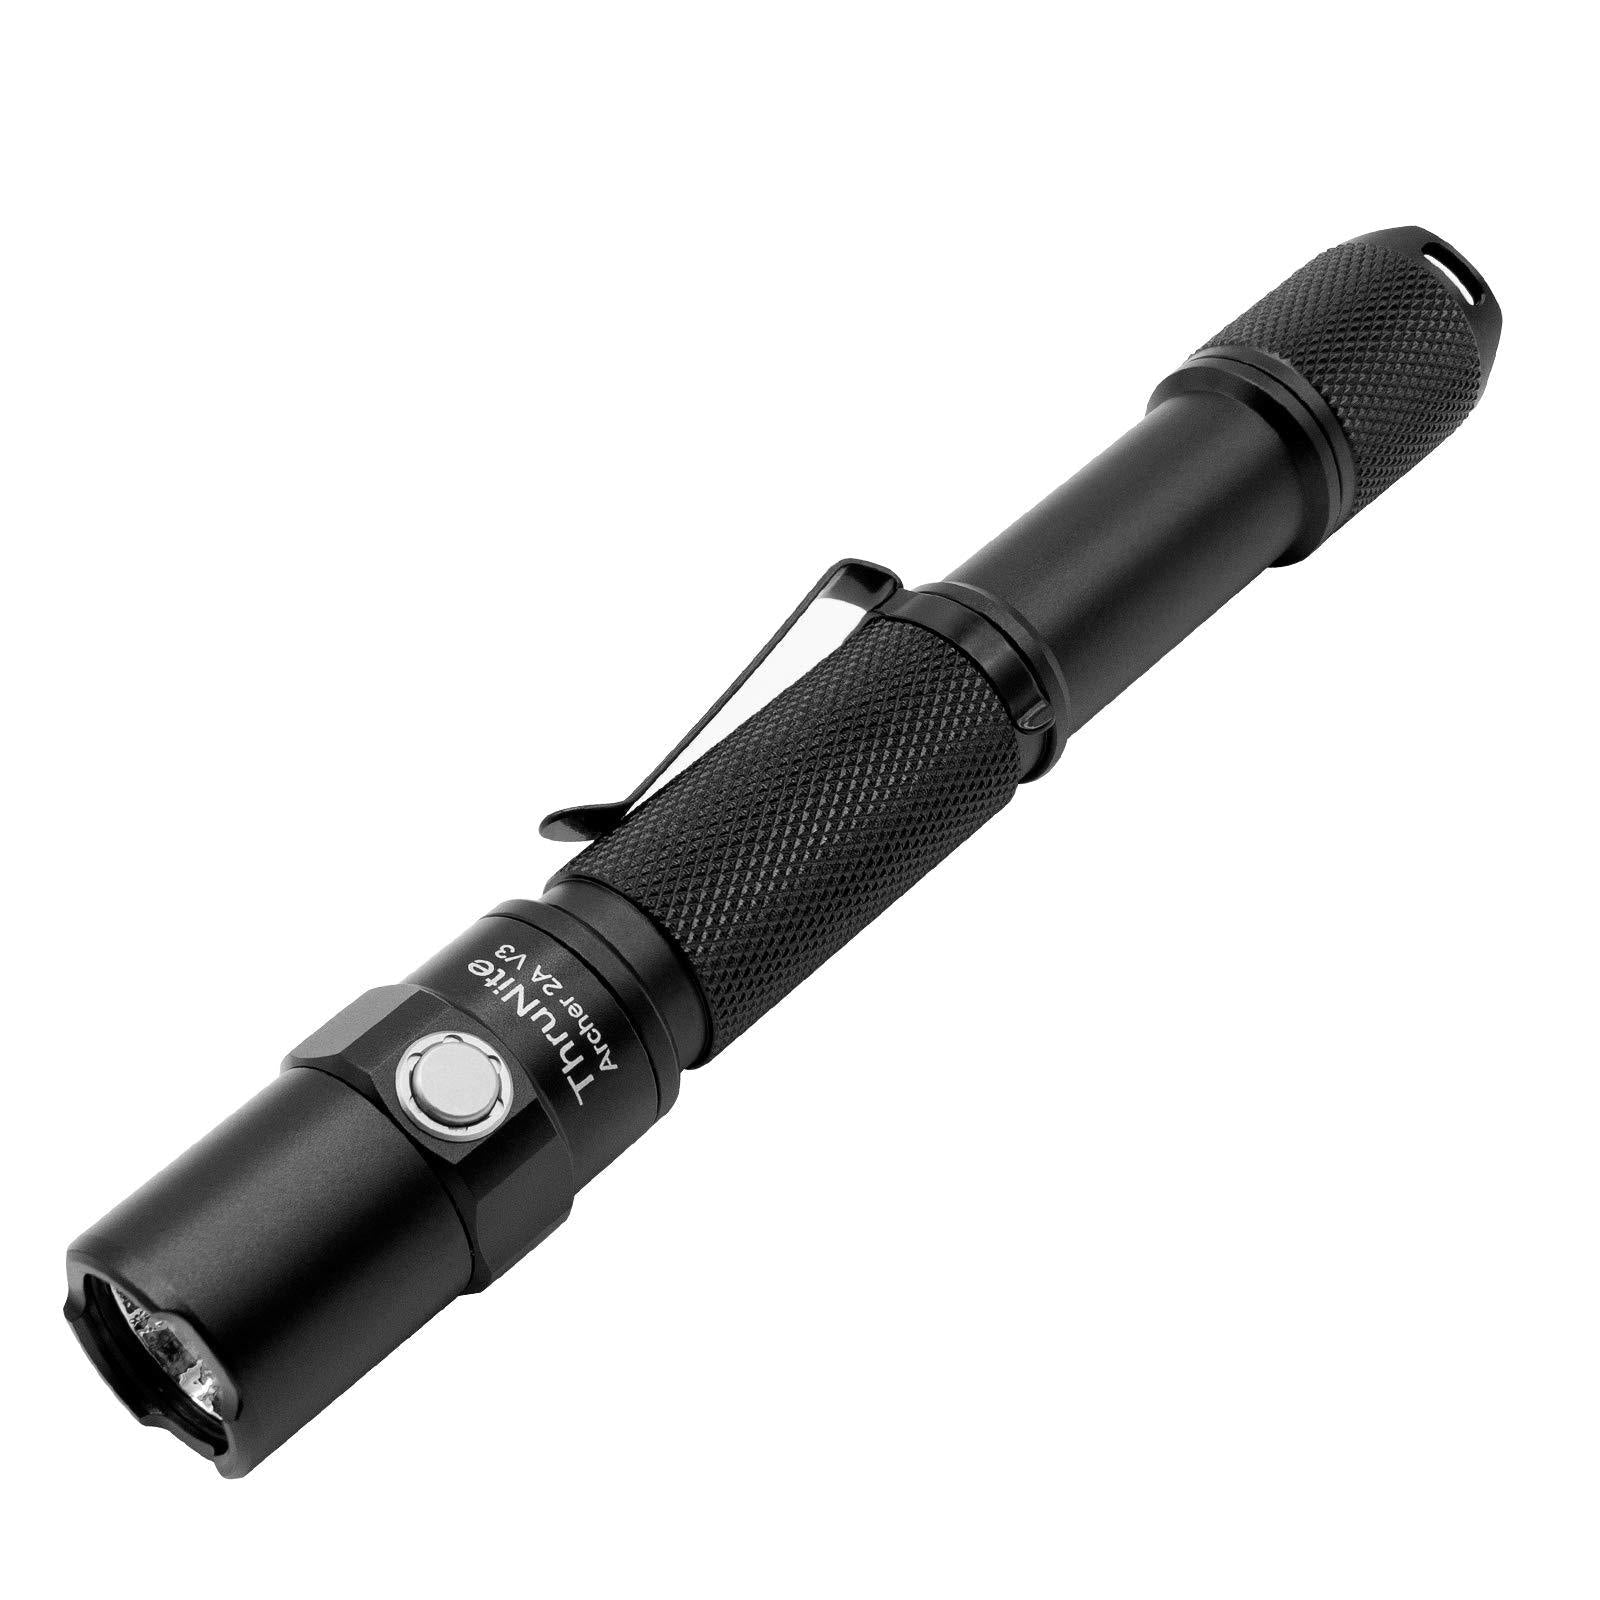 GearLight S1050 High Lumens LED Flashlight Modes, Zoomable, for Camping ＆ Emergency - 5